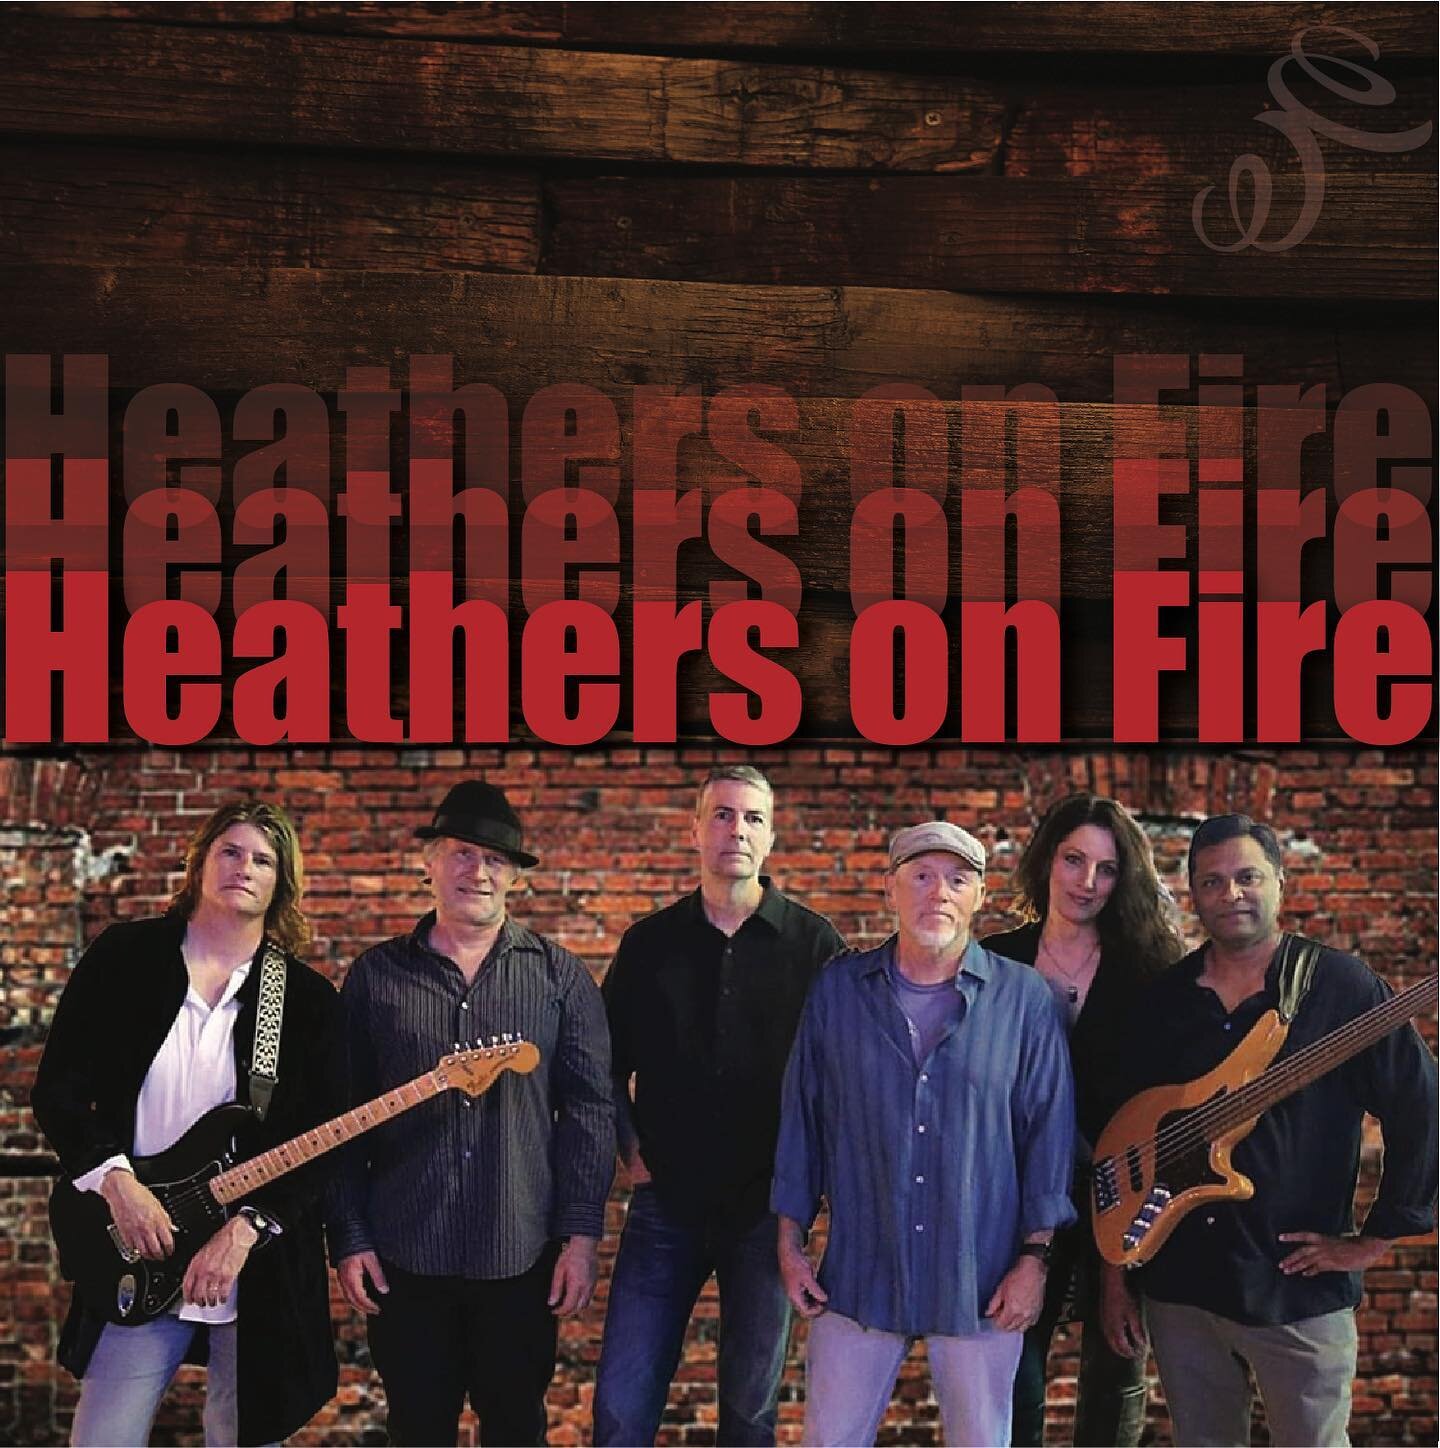 Friday night dancing with Heathers on Fire @heathersonfireband  8-11 pm. 
Danceable hits from the 80s through today. 

#LiveMusic #VenturaNightLife #VenturaEvents #Ventura #VisitVentura #DowntownVentura #VenturaRocks #MainStreetVentura #OutdoorDining